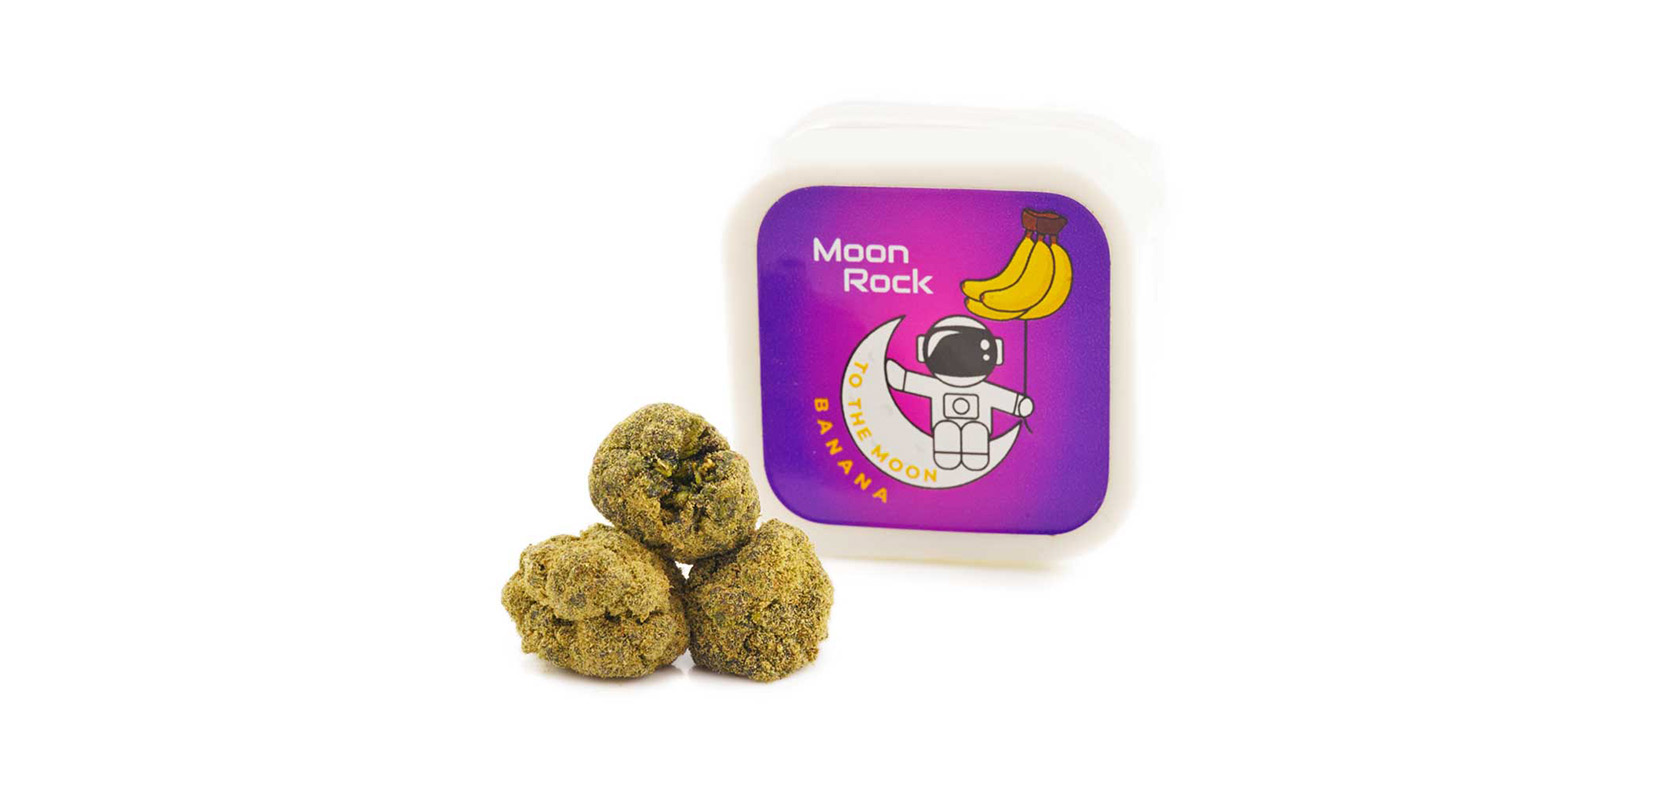 Buy Moonrocks. To The Moon Moon Rock Weed. Best Moon Rocks for Sale in Canada. Online dispensary Canada.